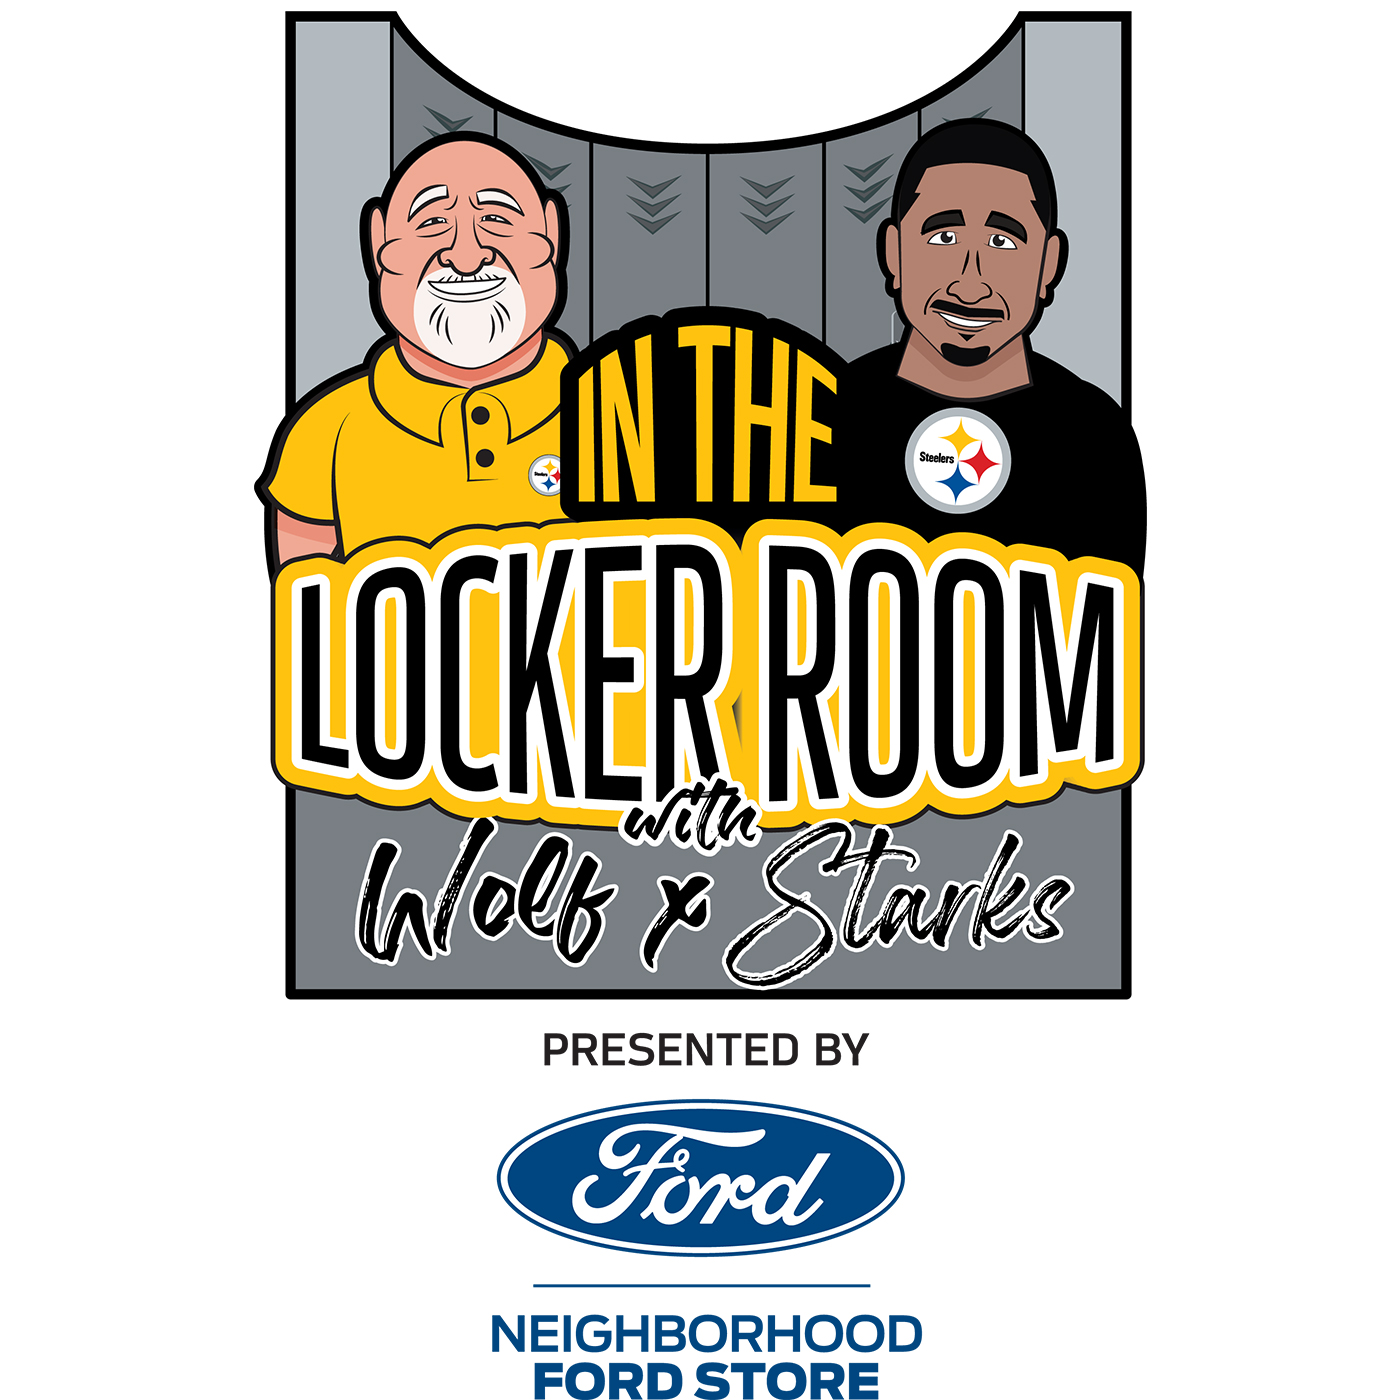 01/20/22 Segment 2: Tom Bradley and Gerry Dulac join the locker room